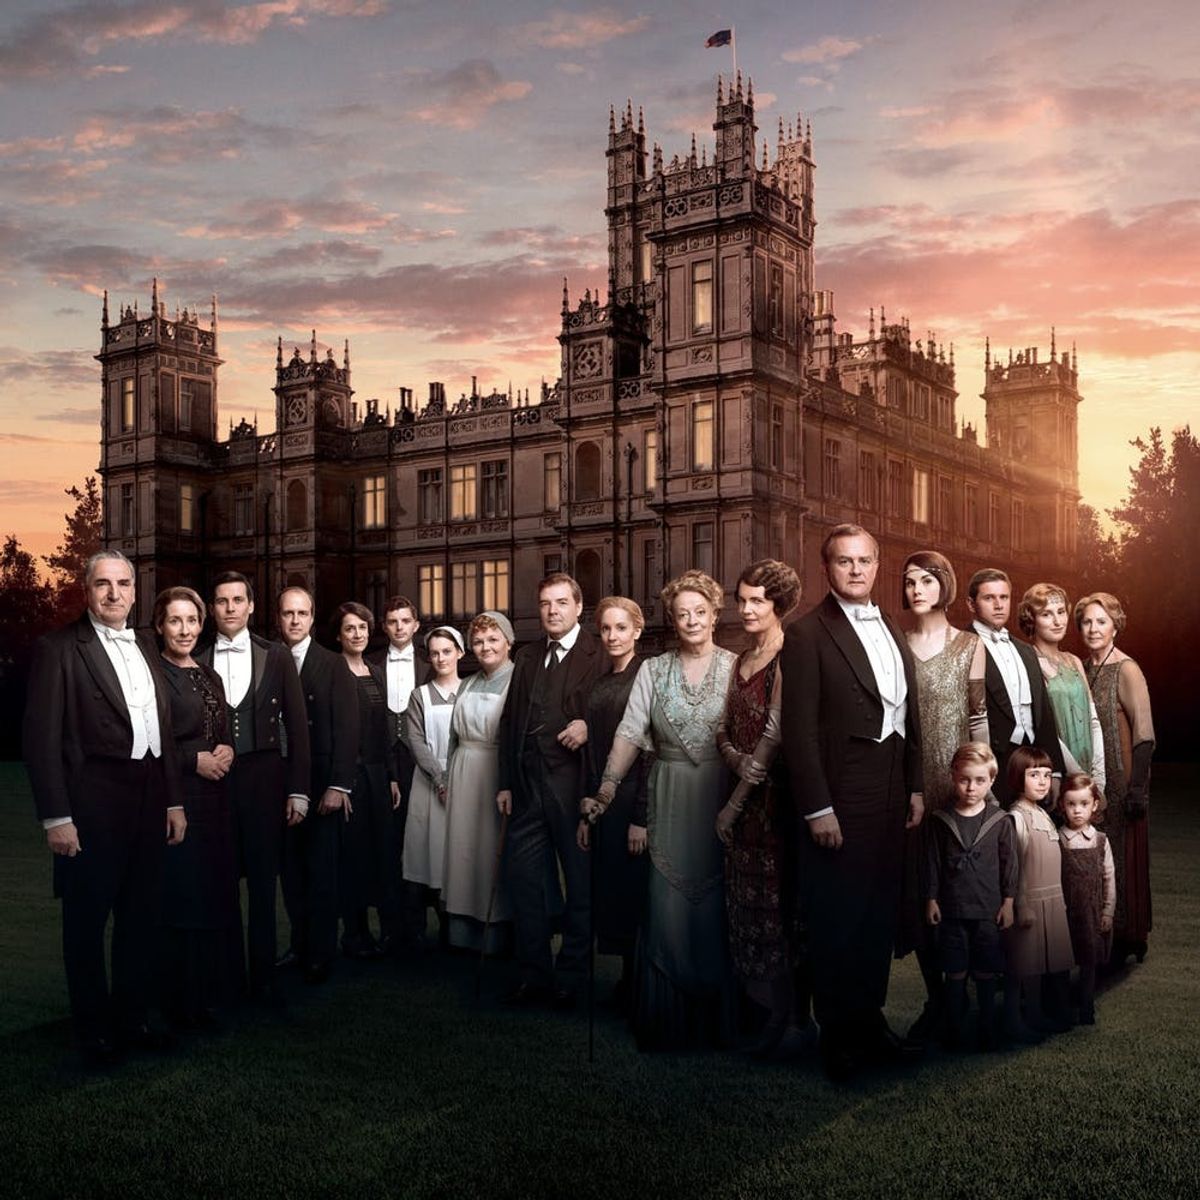 It’s Official: A ‘Downton Abbey’ Movie Is in the Works With the Original Cast